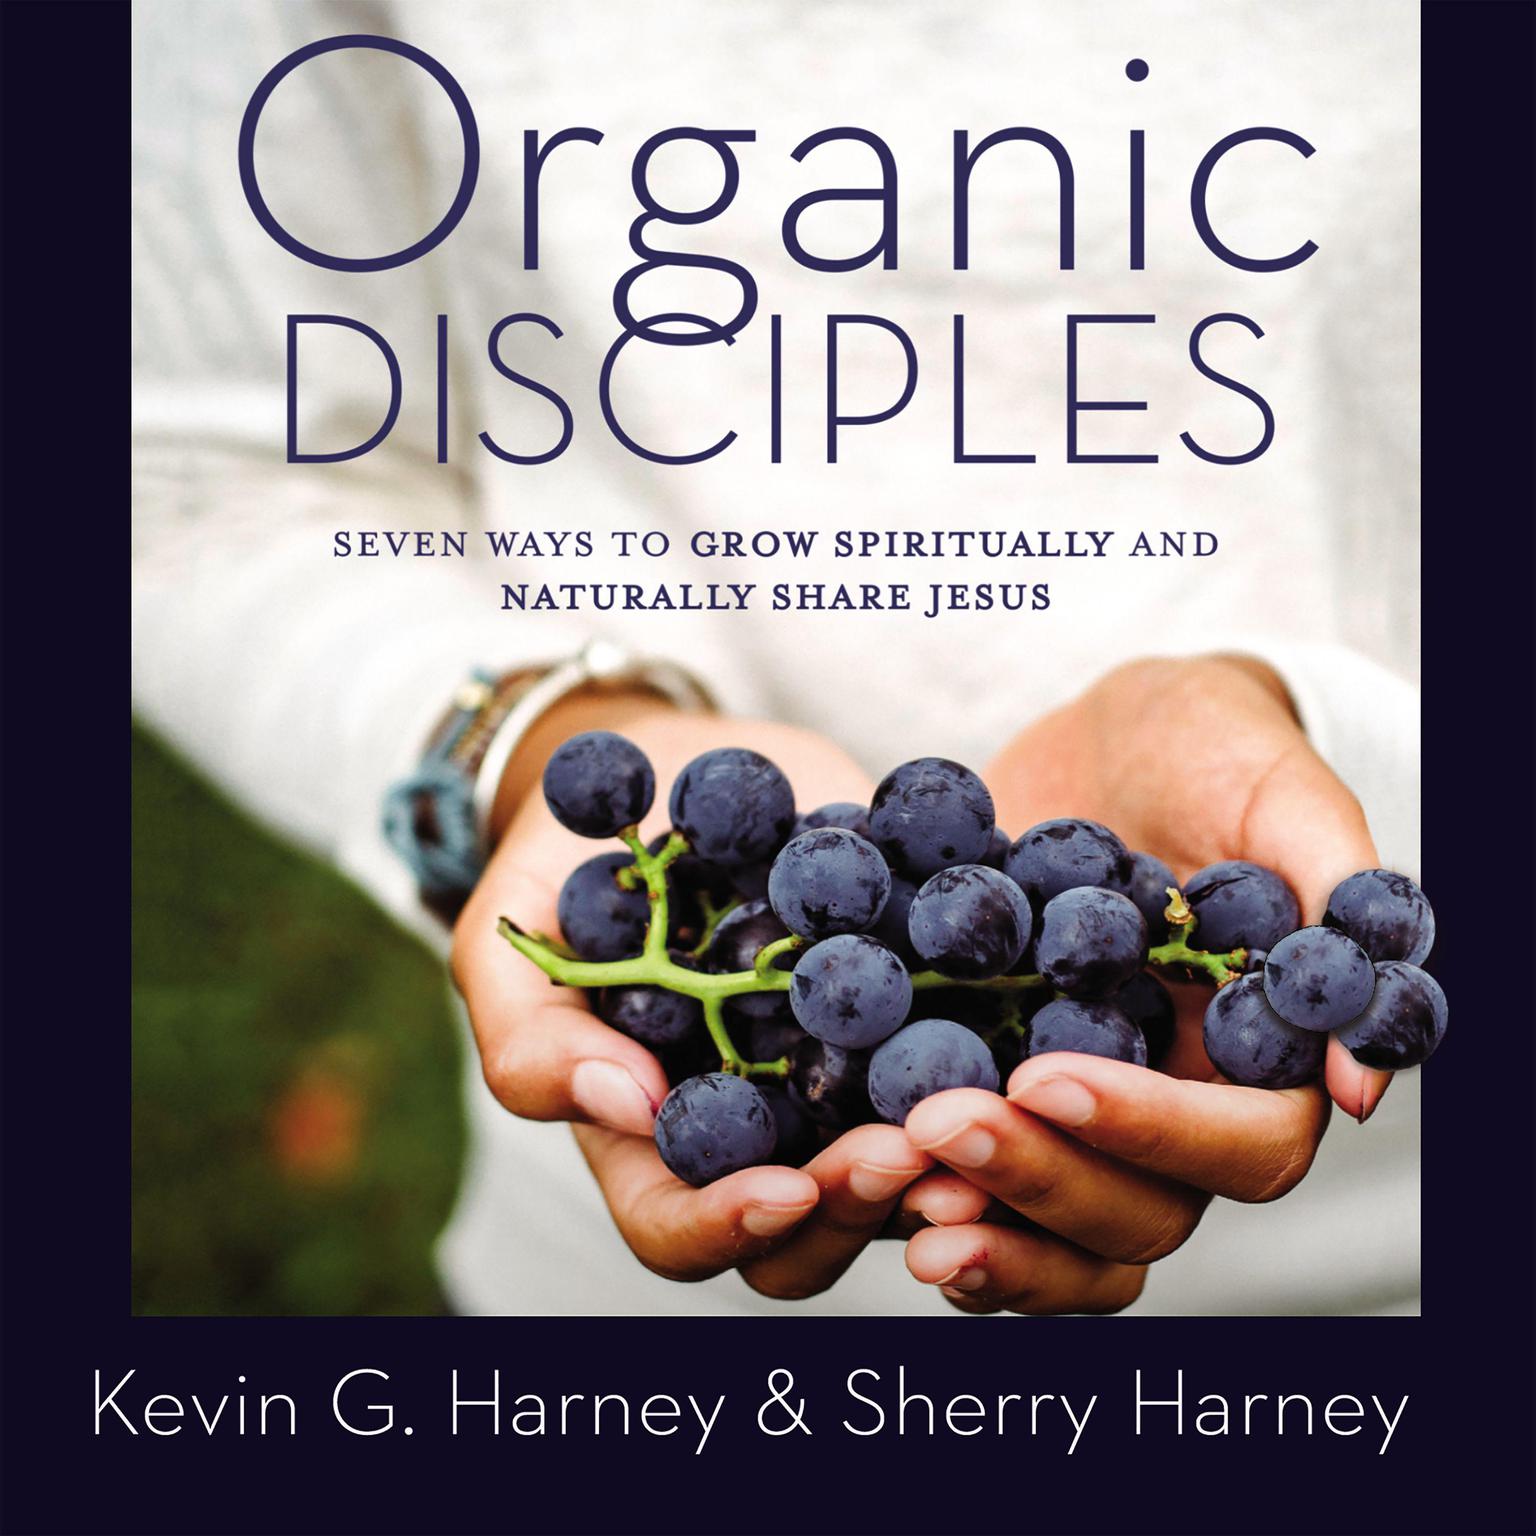 Organic Disciples: Seven Ways to Grow Spiritually and Naturally Share Jesus Audiobook, by Kevin G. Harney